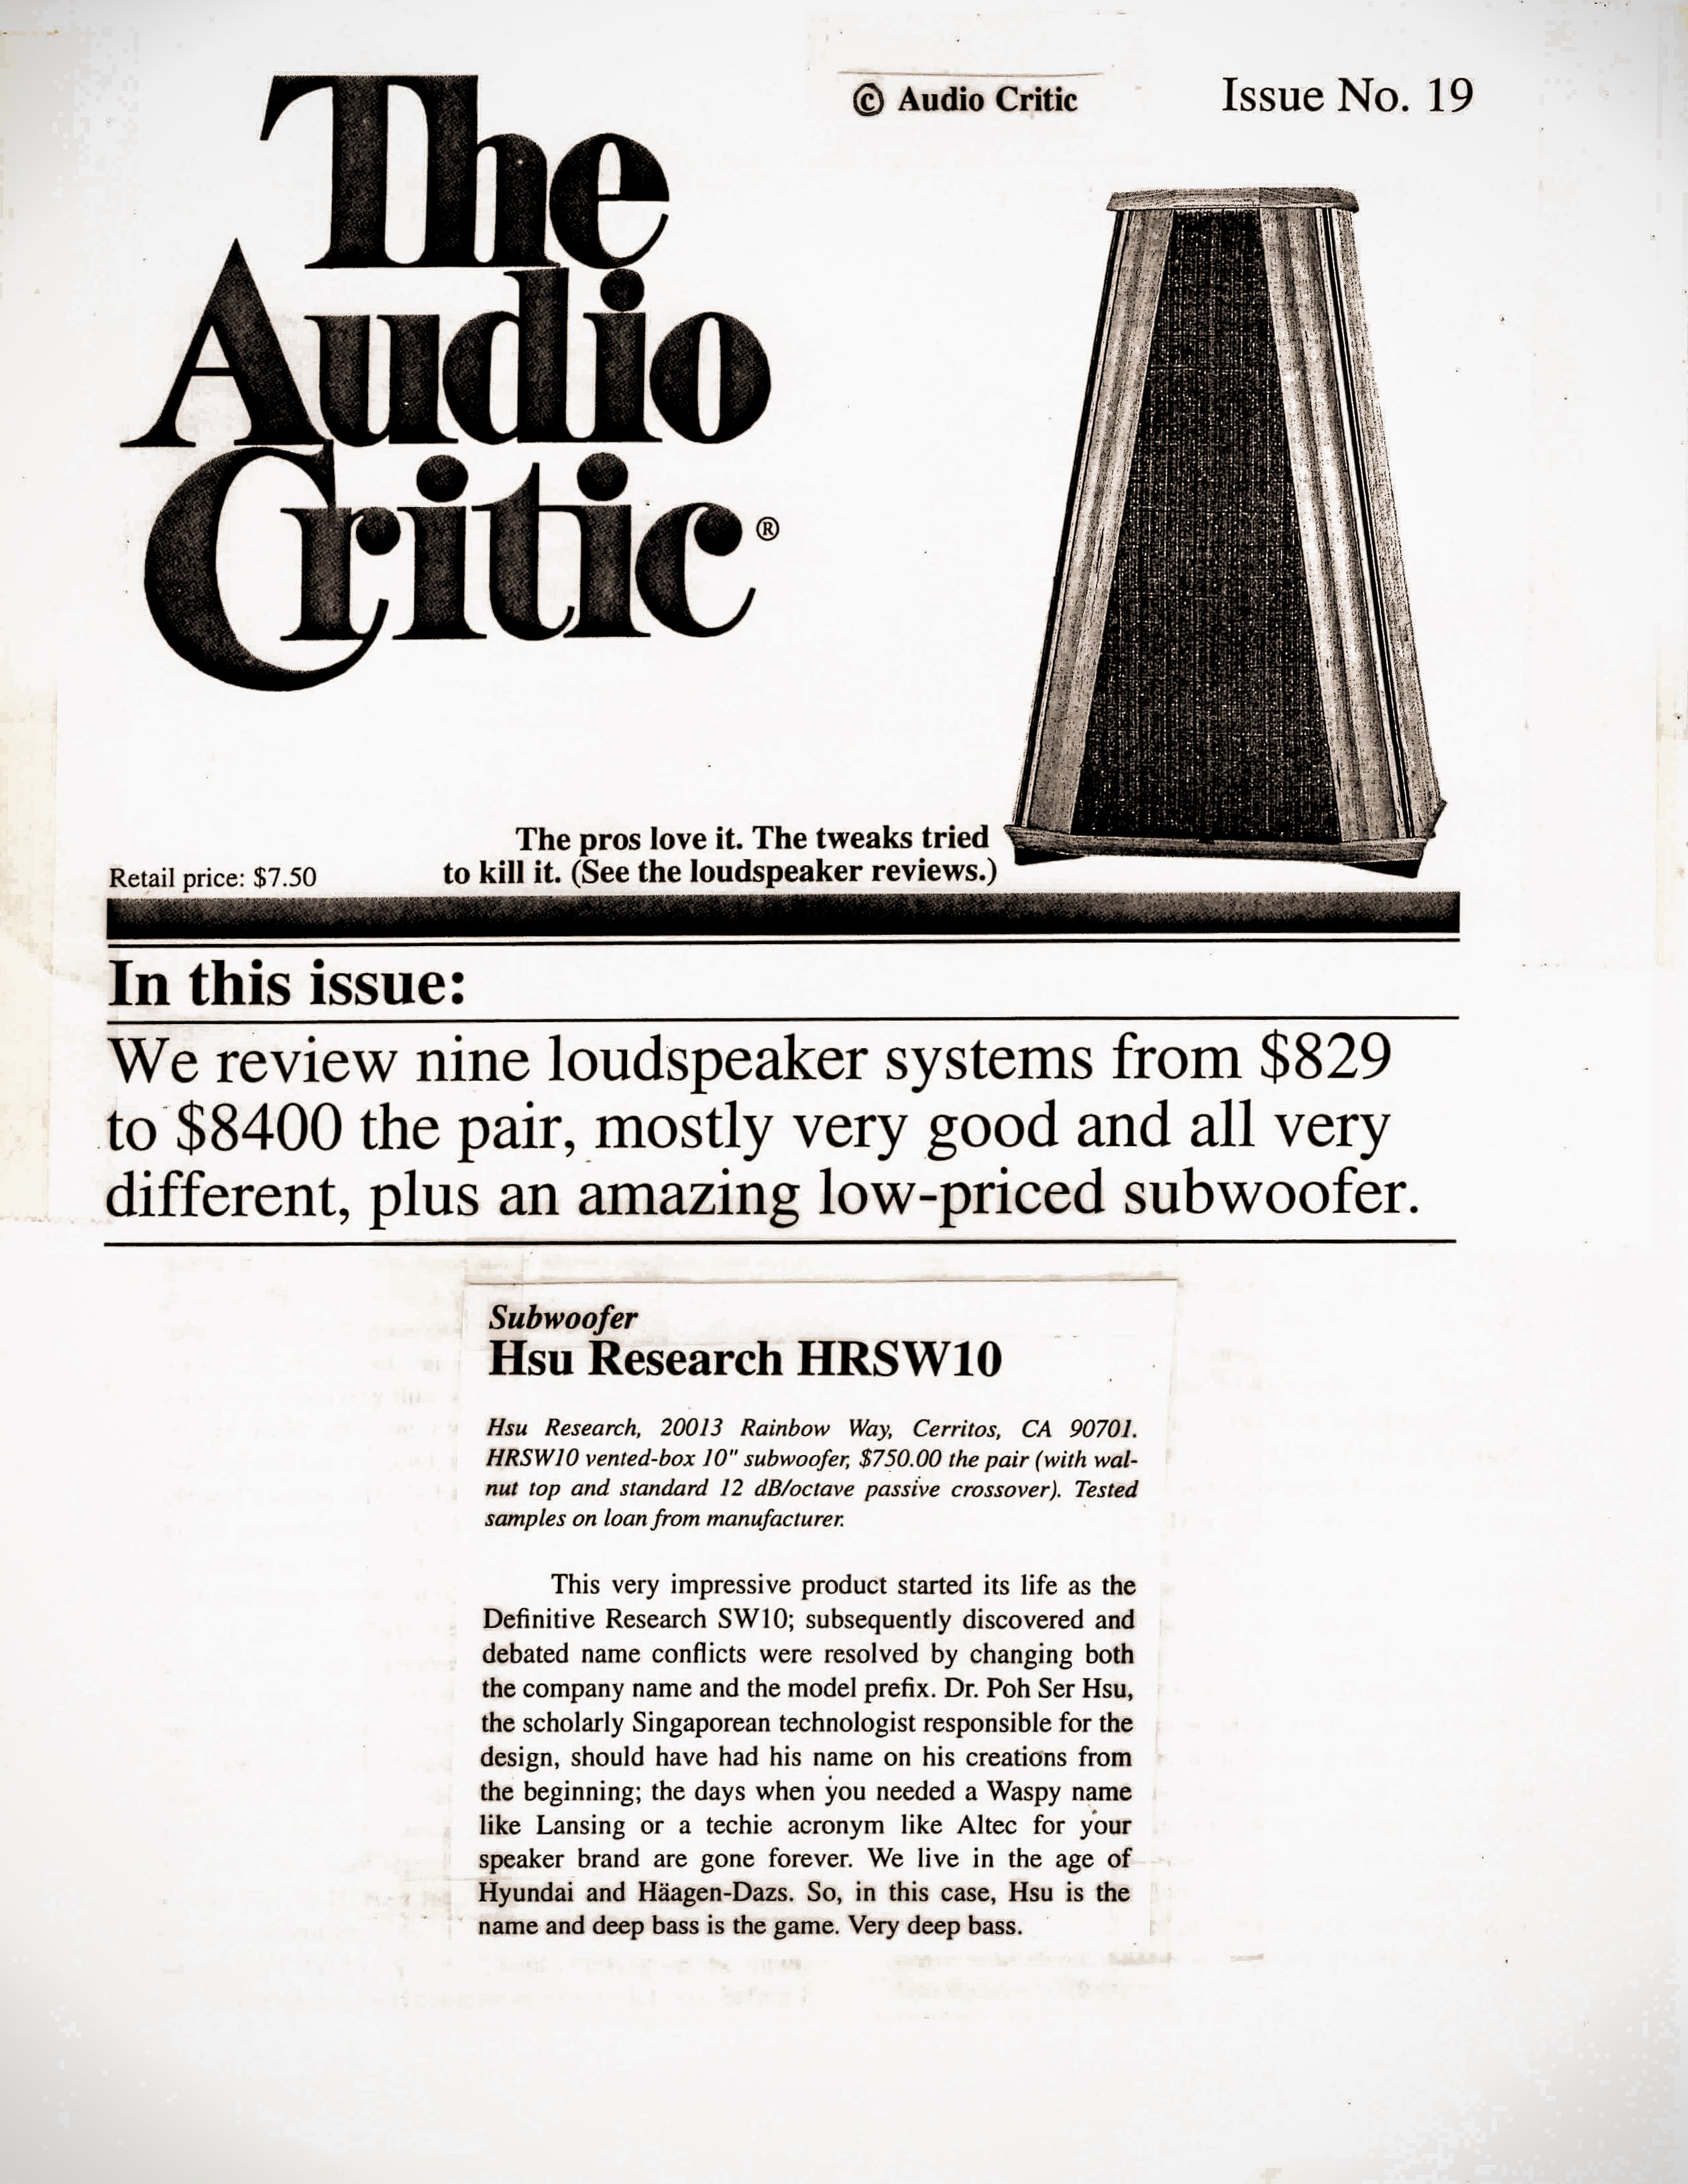 The Audio Critic - HRSW10 "Amazing low-priced subwoofer"